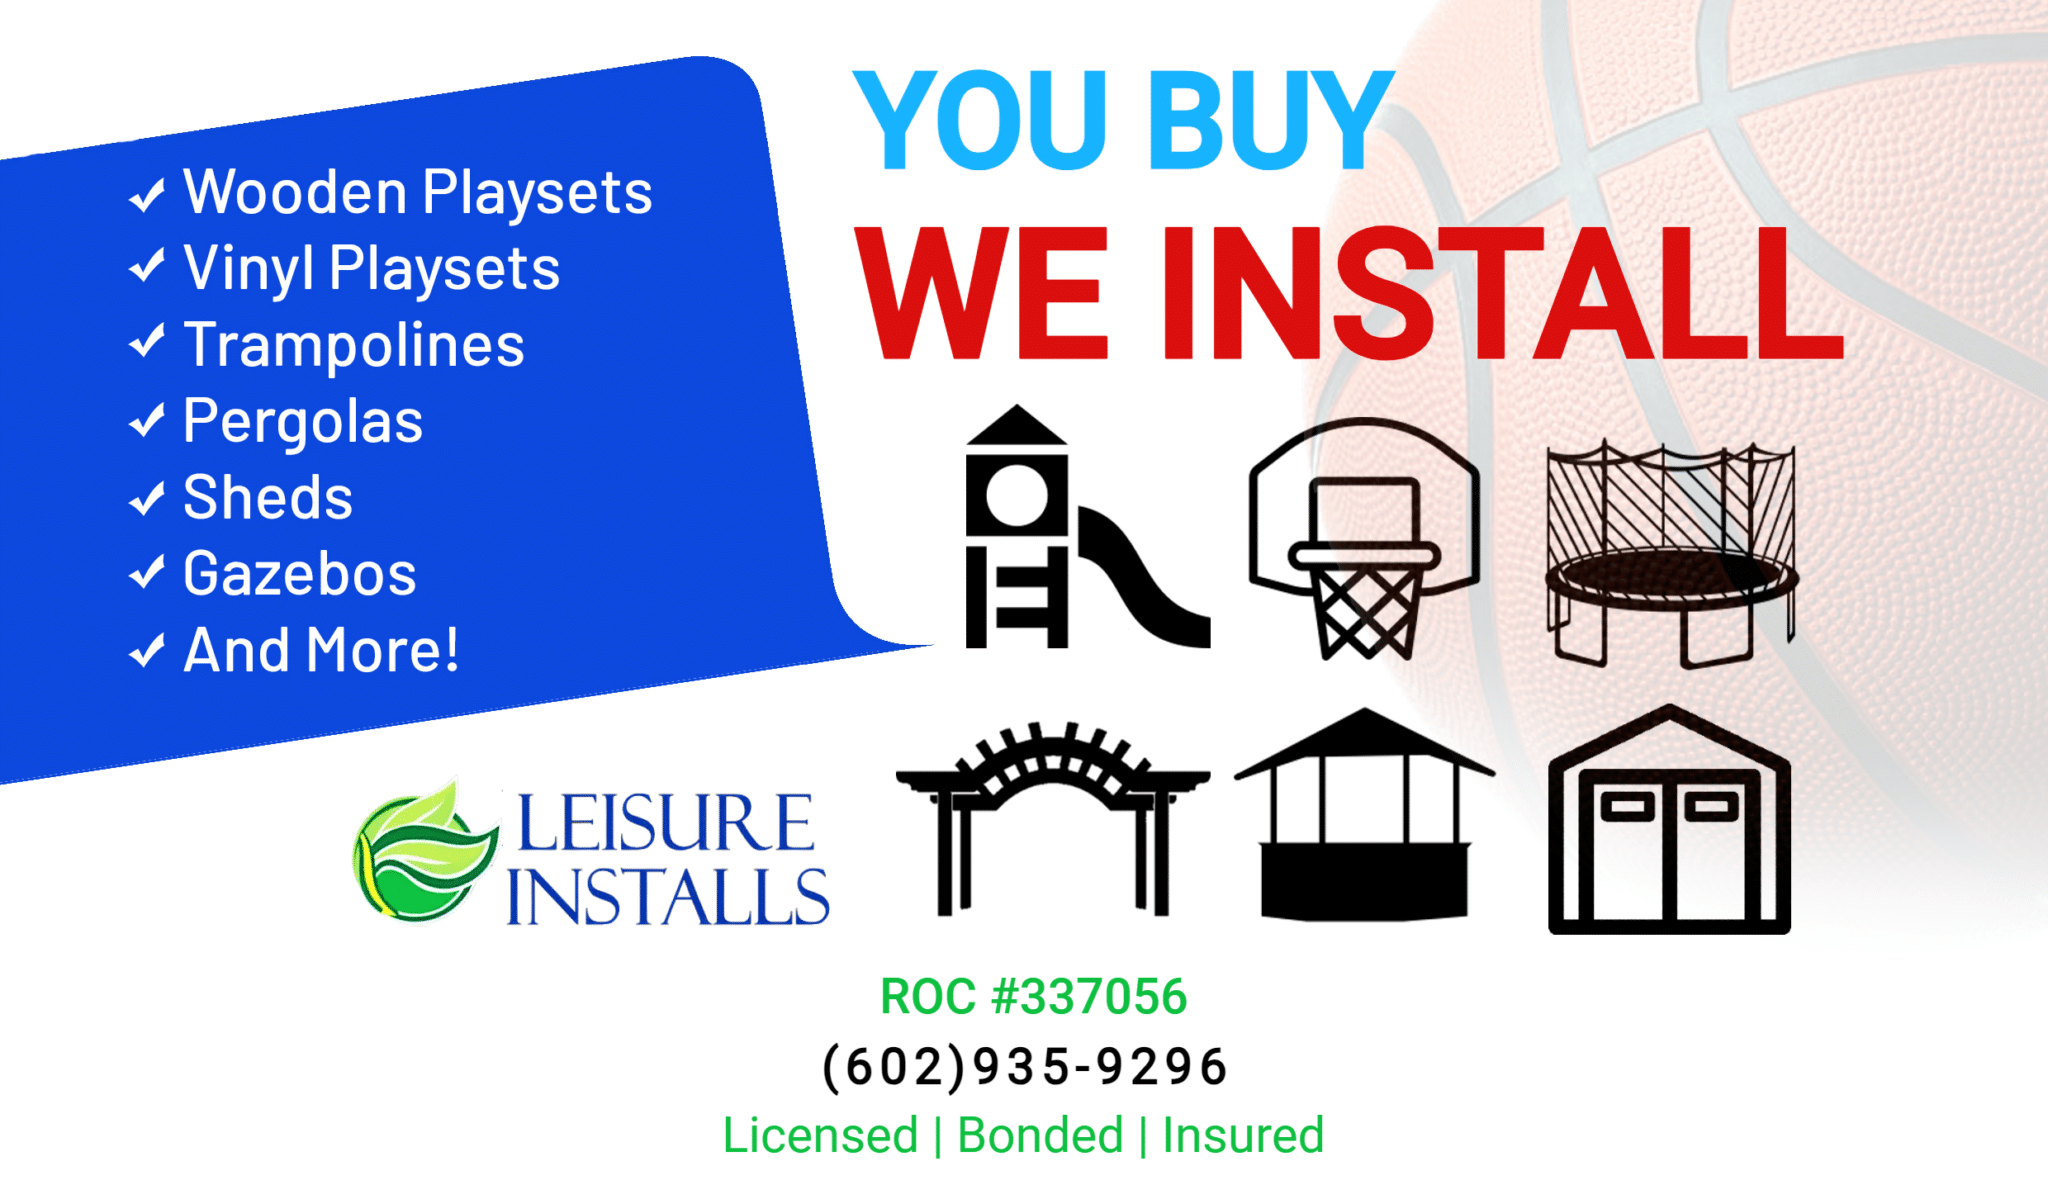 You Buy We Install by Leisure Installs